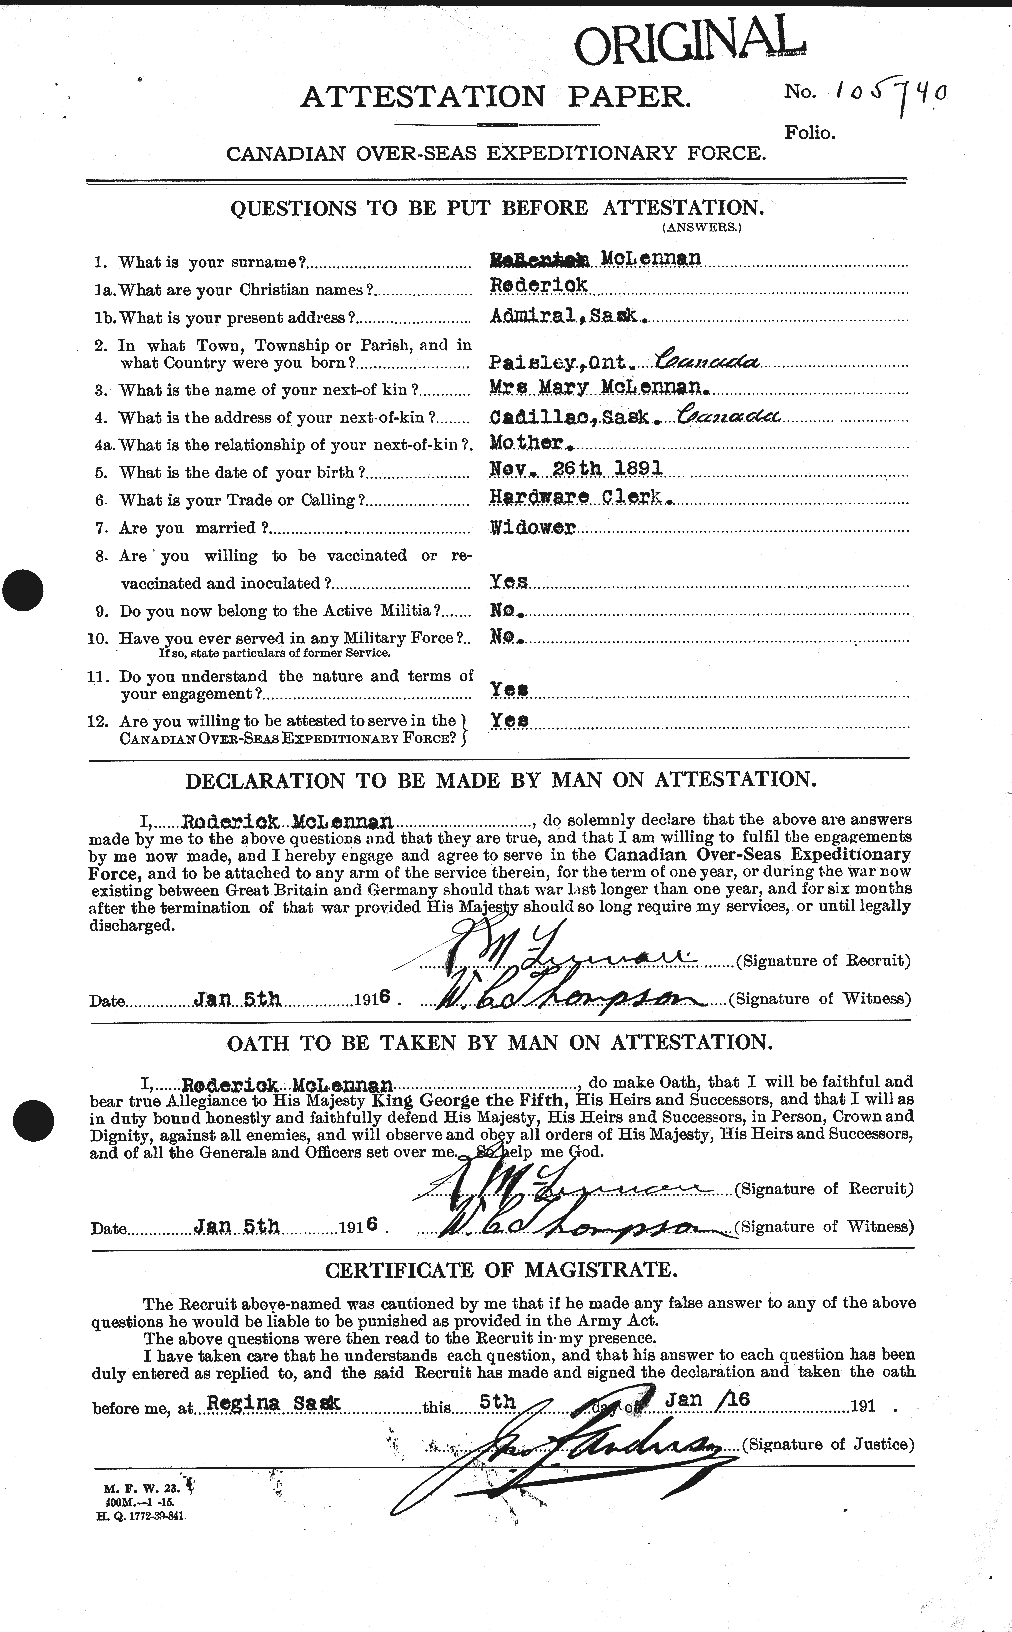 Personnel Records of the First World War - CEF 536611a